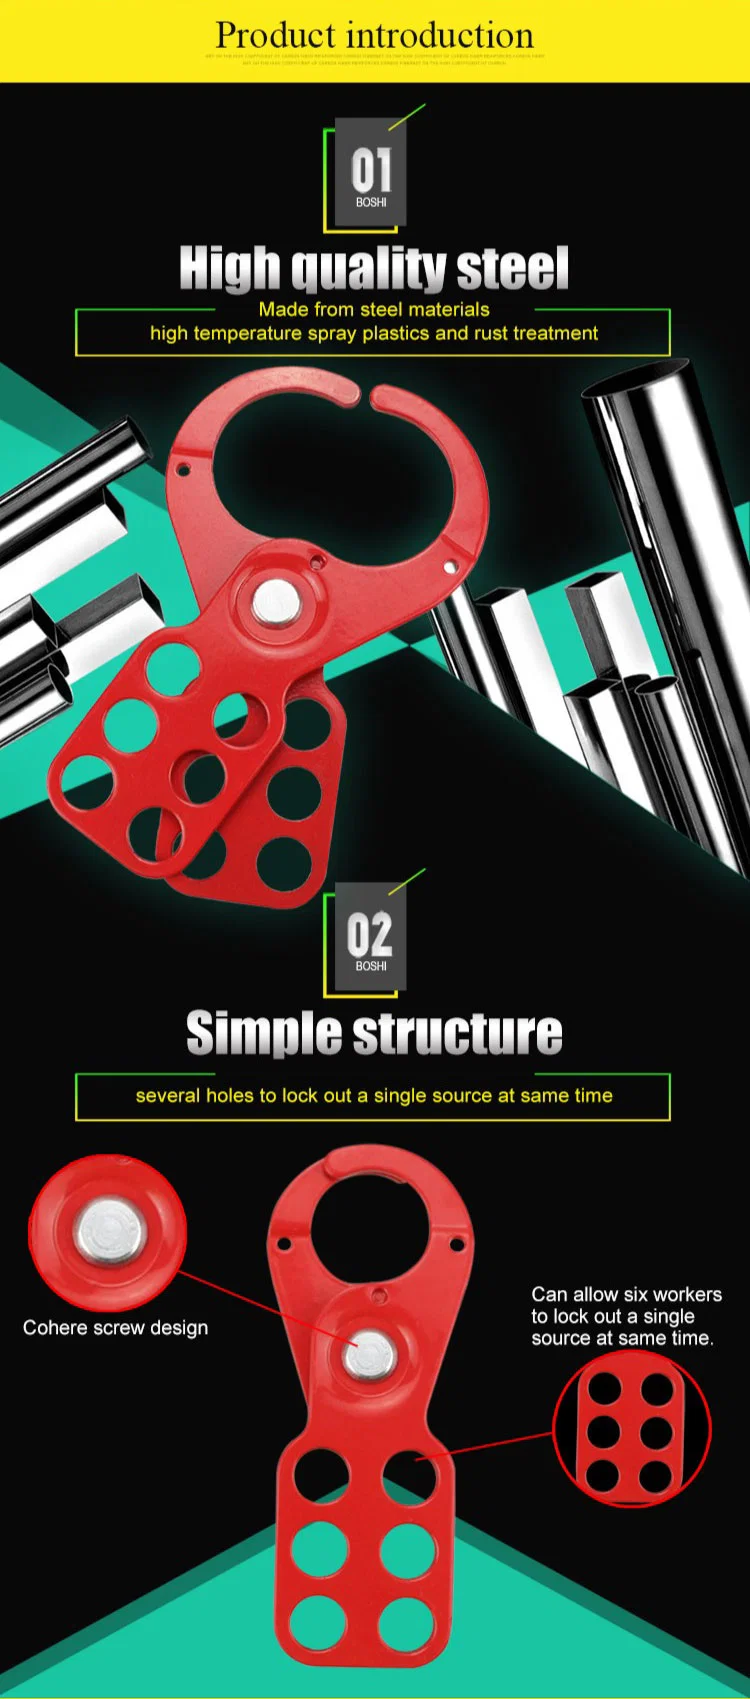 Bozzys Customized Design Steel Material Red Safety Lockout Hasp